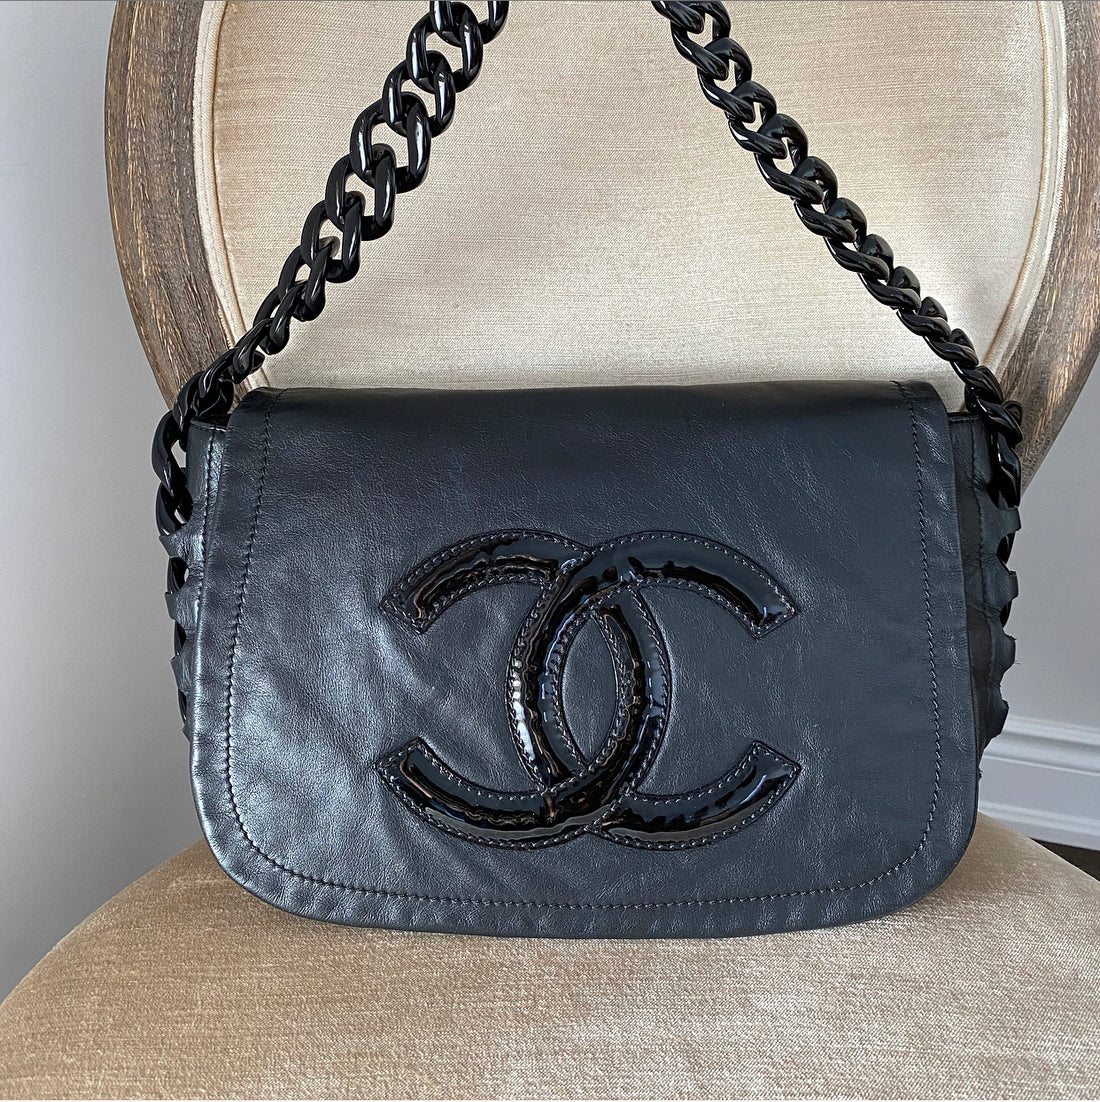 CHANEL Patent Leather Clutch Bags for Women